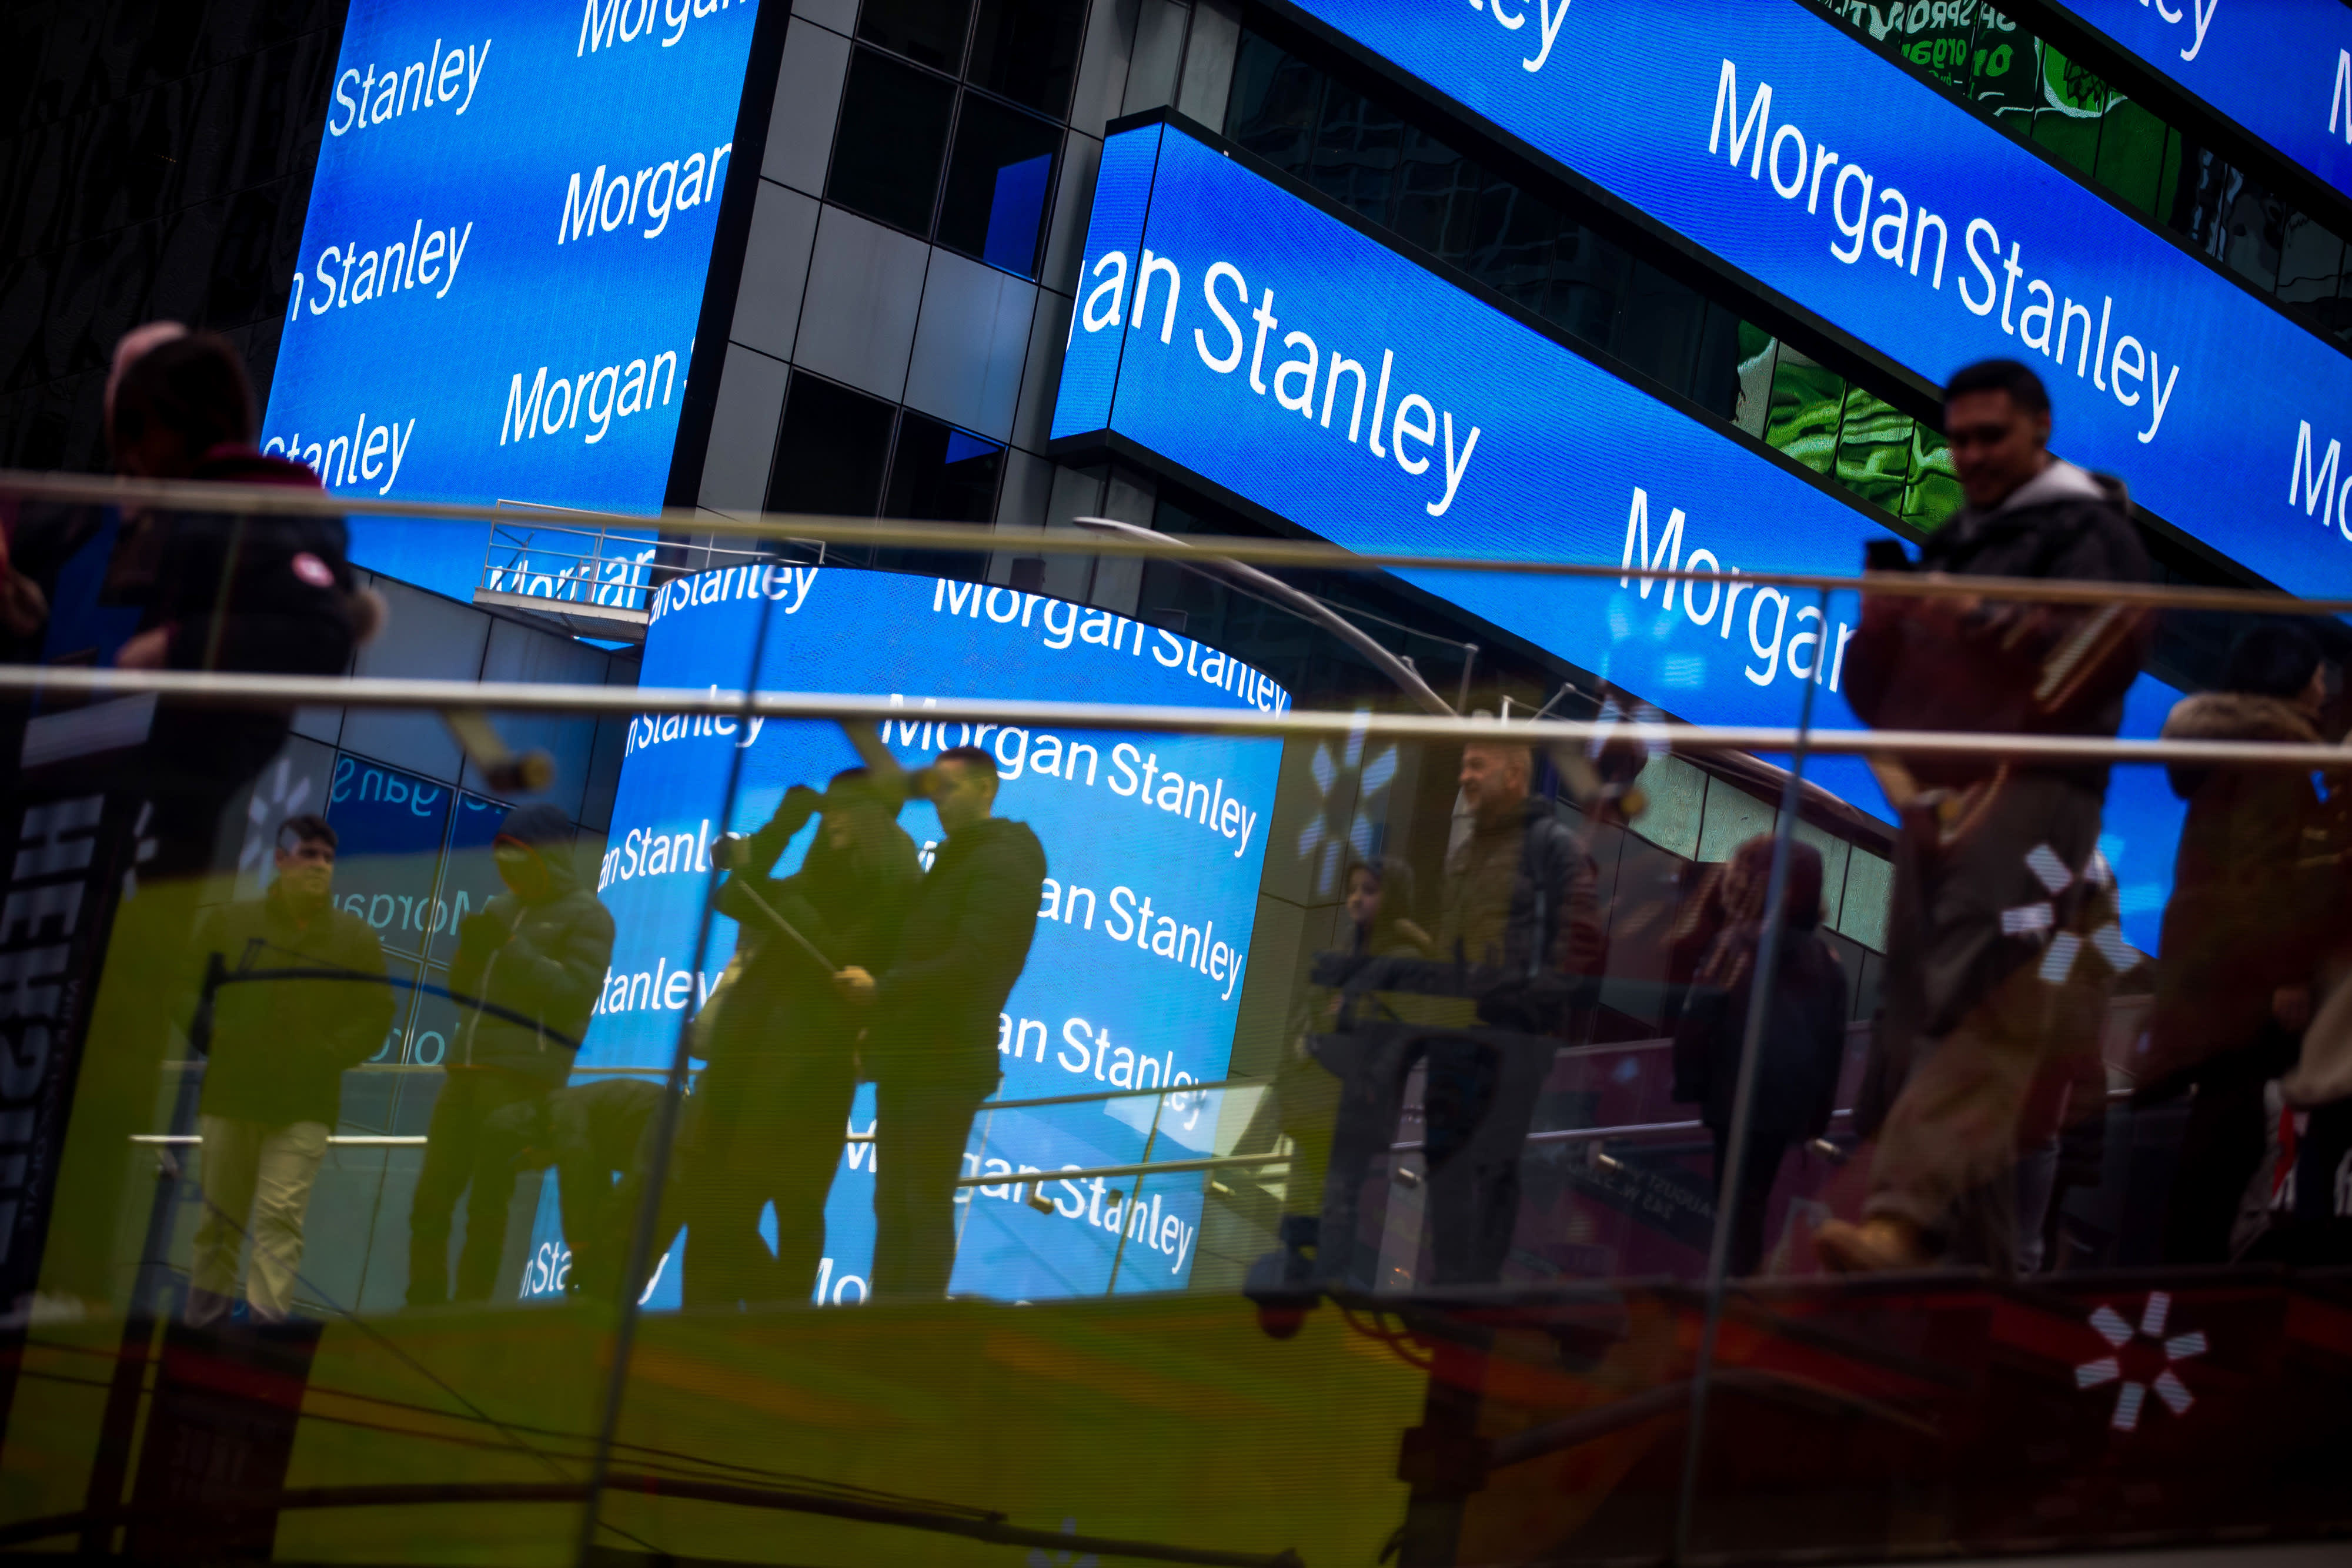 Morgan Stanley dumped $ 5 billion in Archegos stock before its sale by fire